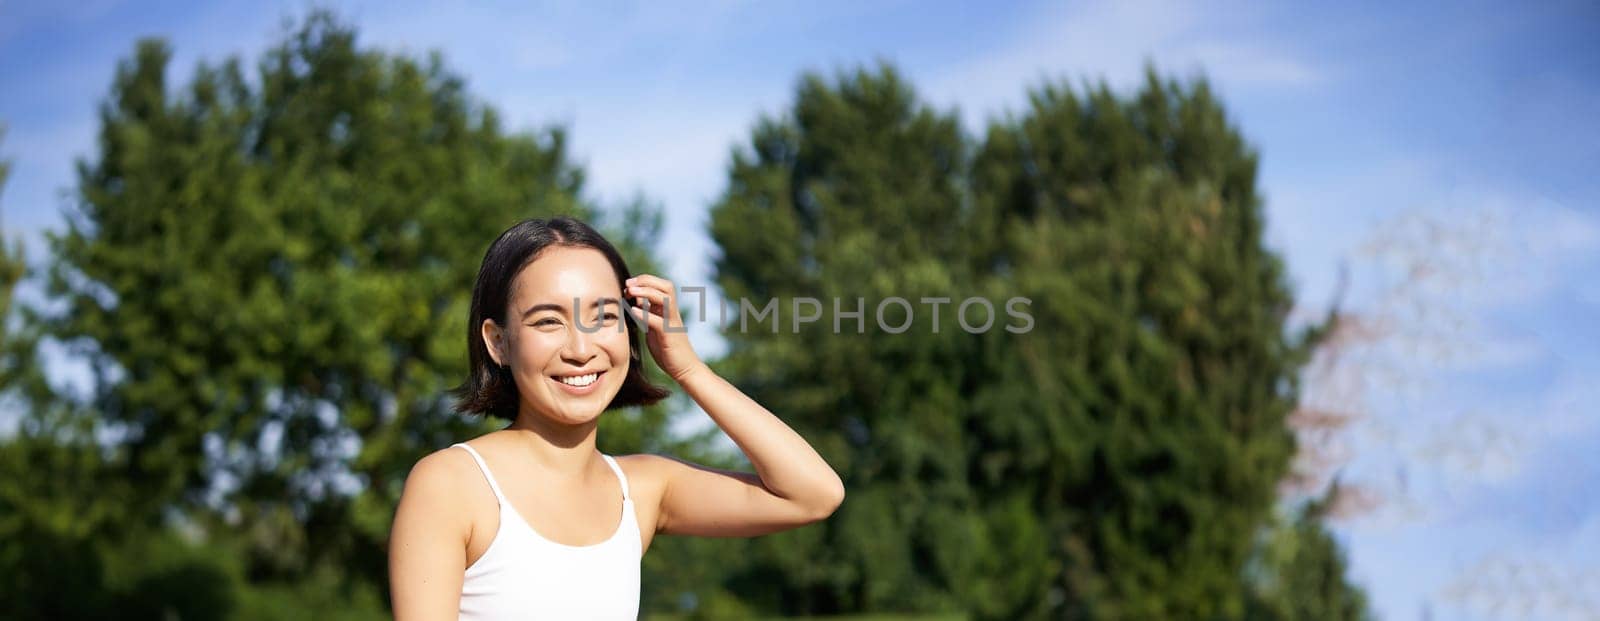 Meditation and mindfulness. Young asian woman smiling on fitness mat in park, doing yoga training, meditating on fresh air.